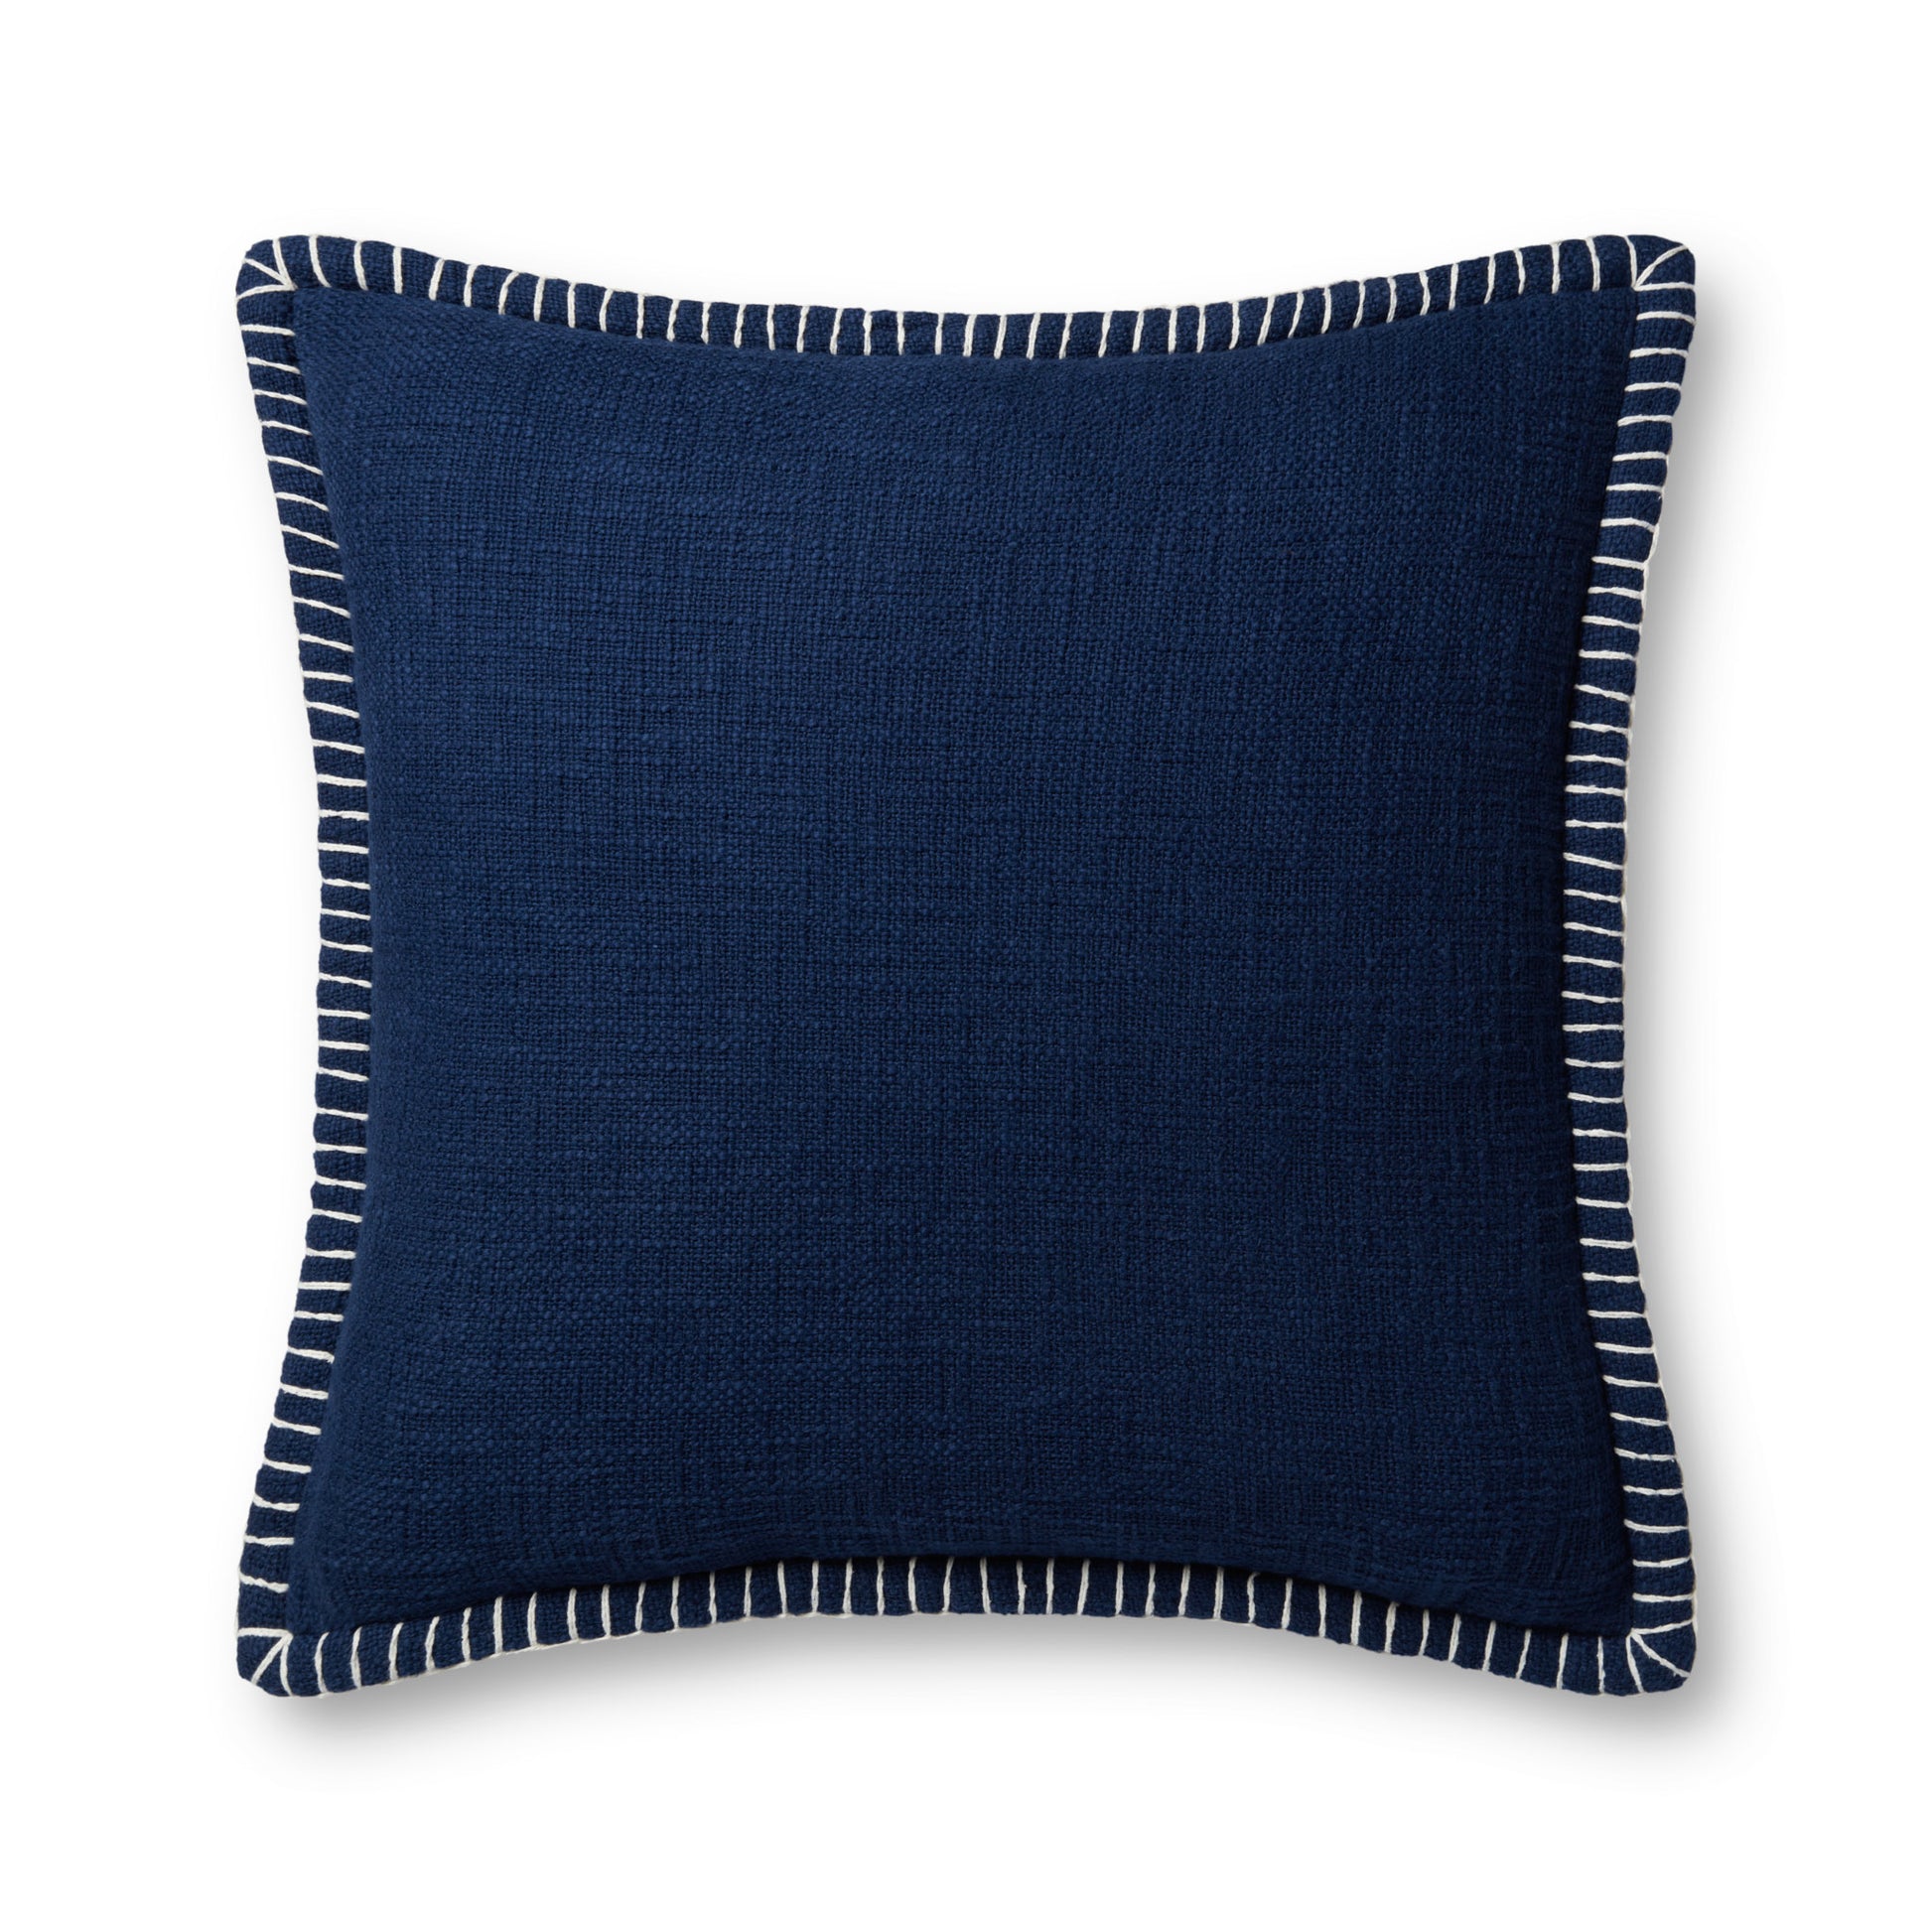 Photo of a pillow;  PLL0109 Navy 22'' x 22'' Cover w/Poly Pillow